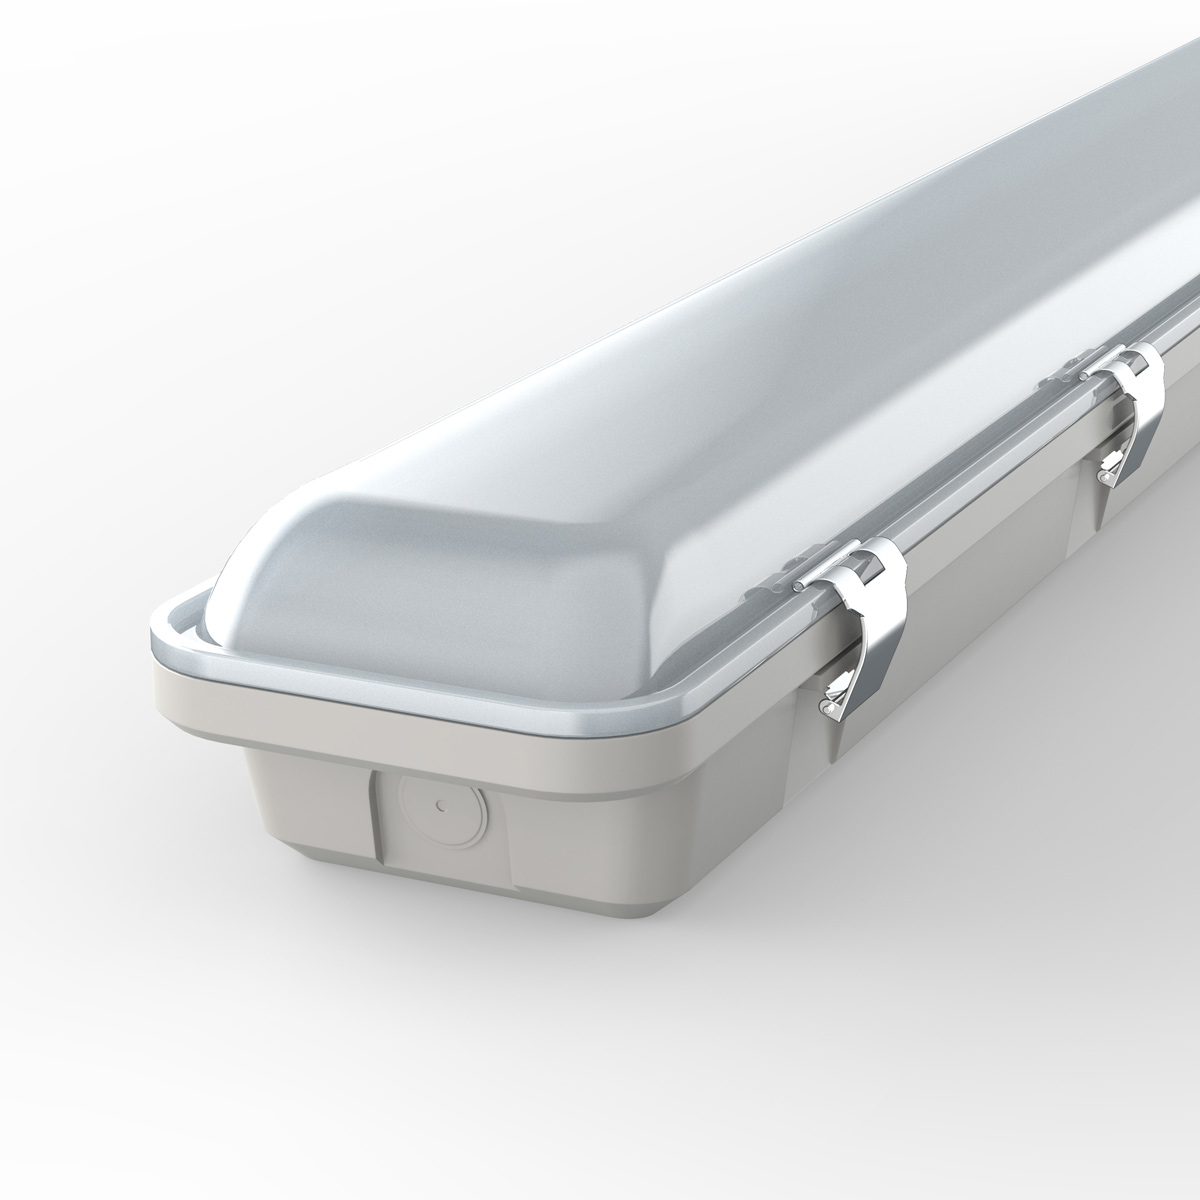 View 60w NCF IP65 LED Batten 6FT with Emergency Module and Sensor 180CM information